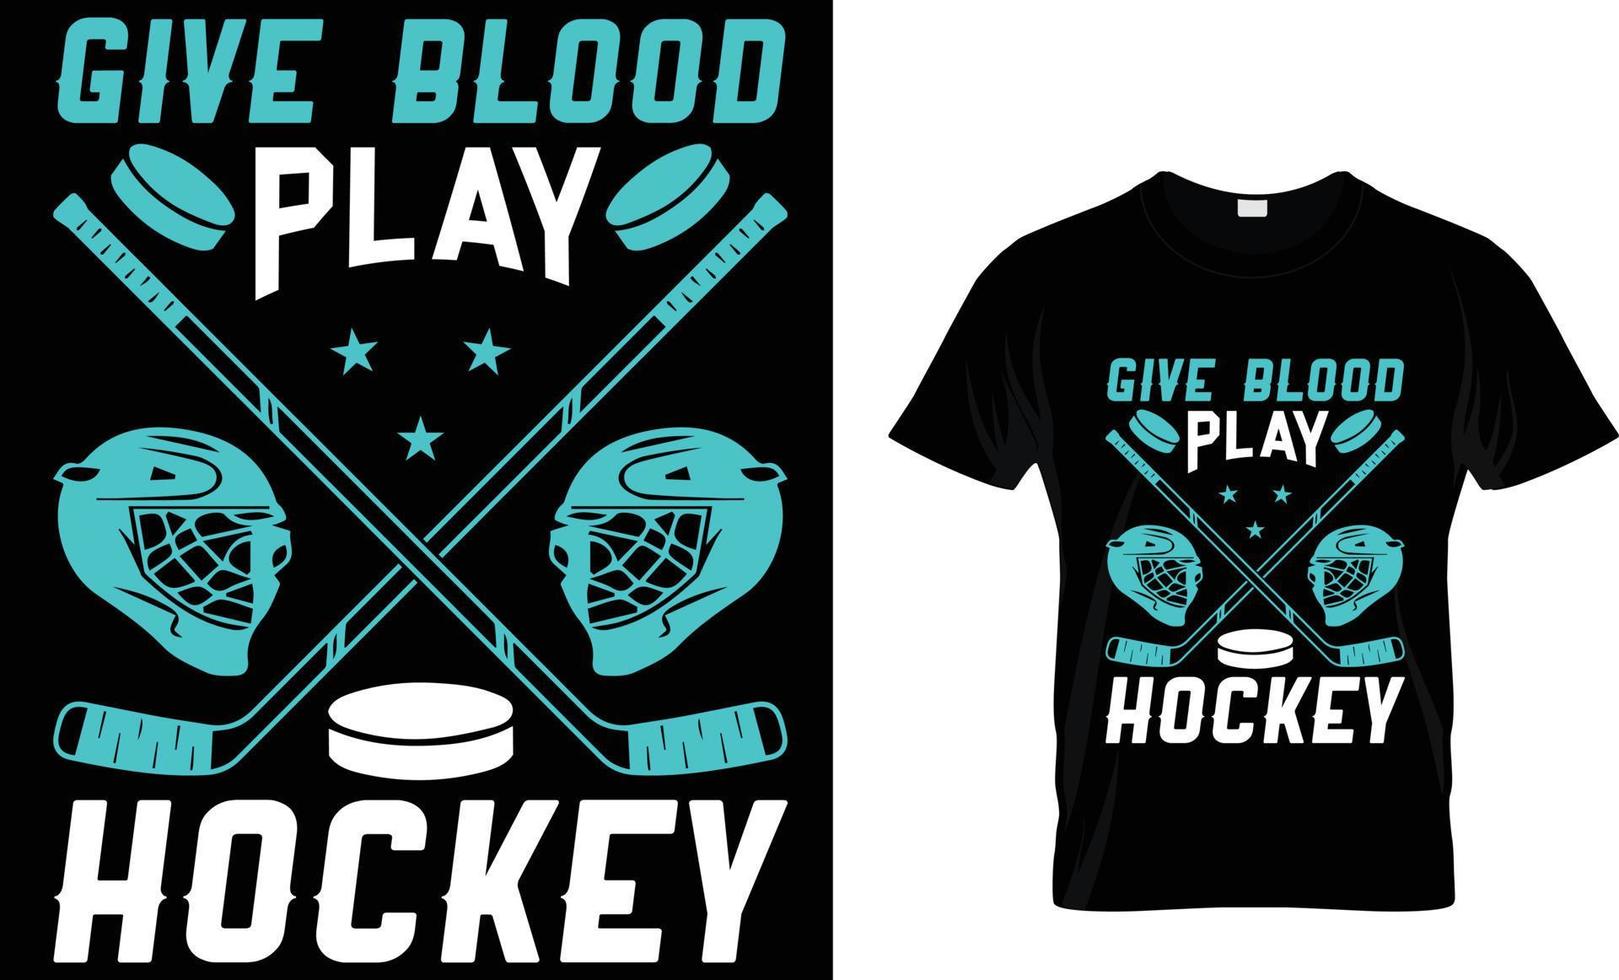 Ice hockey t-shirt design vector graphic. Give blood play hockey ...